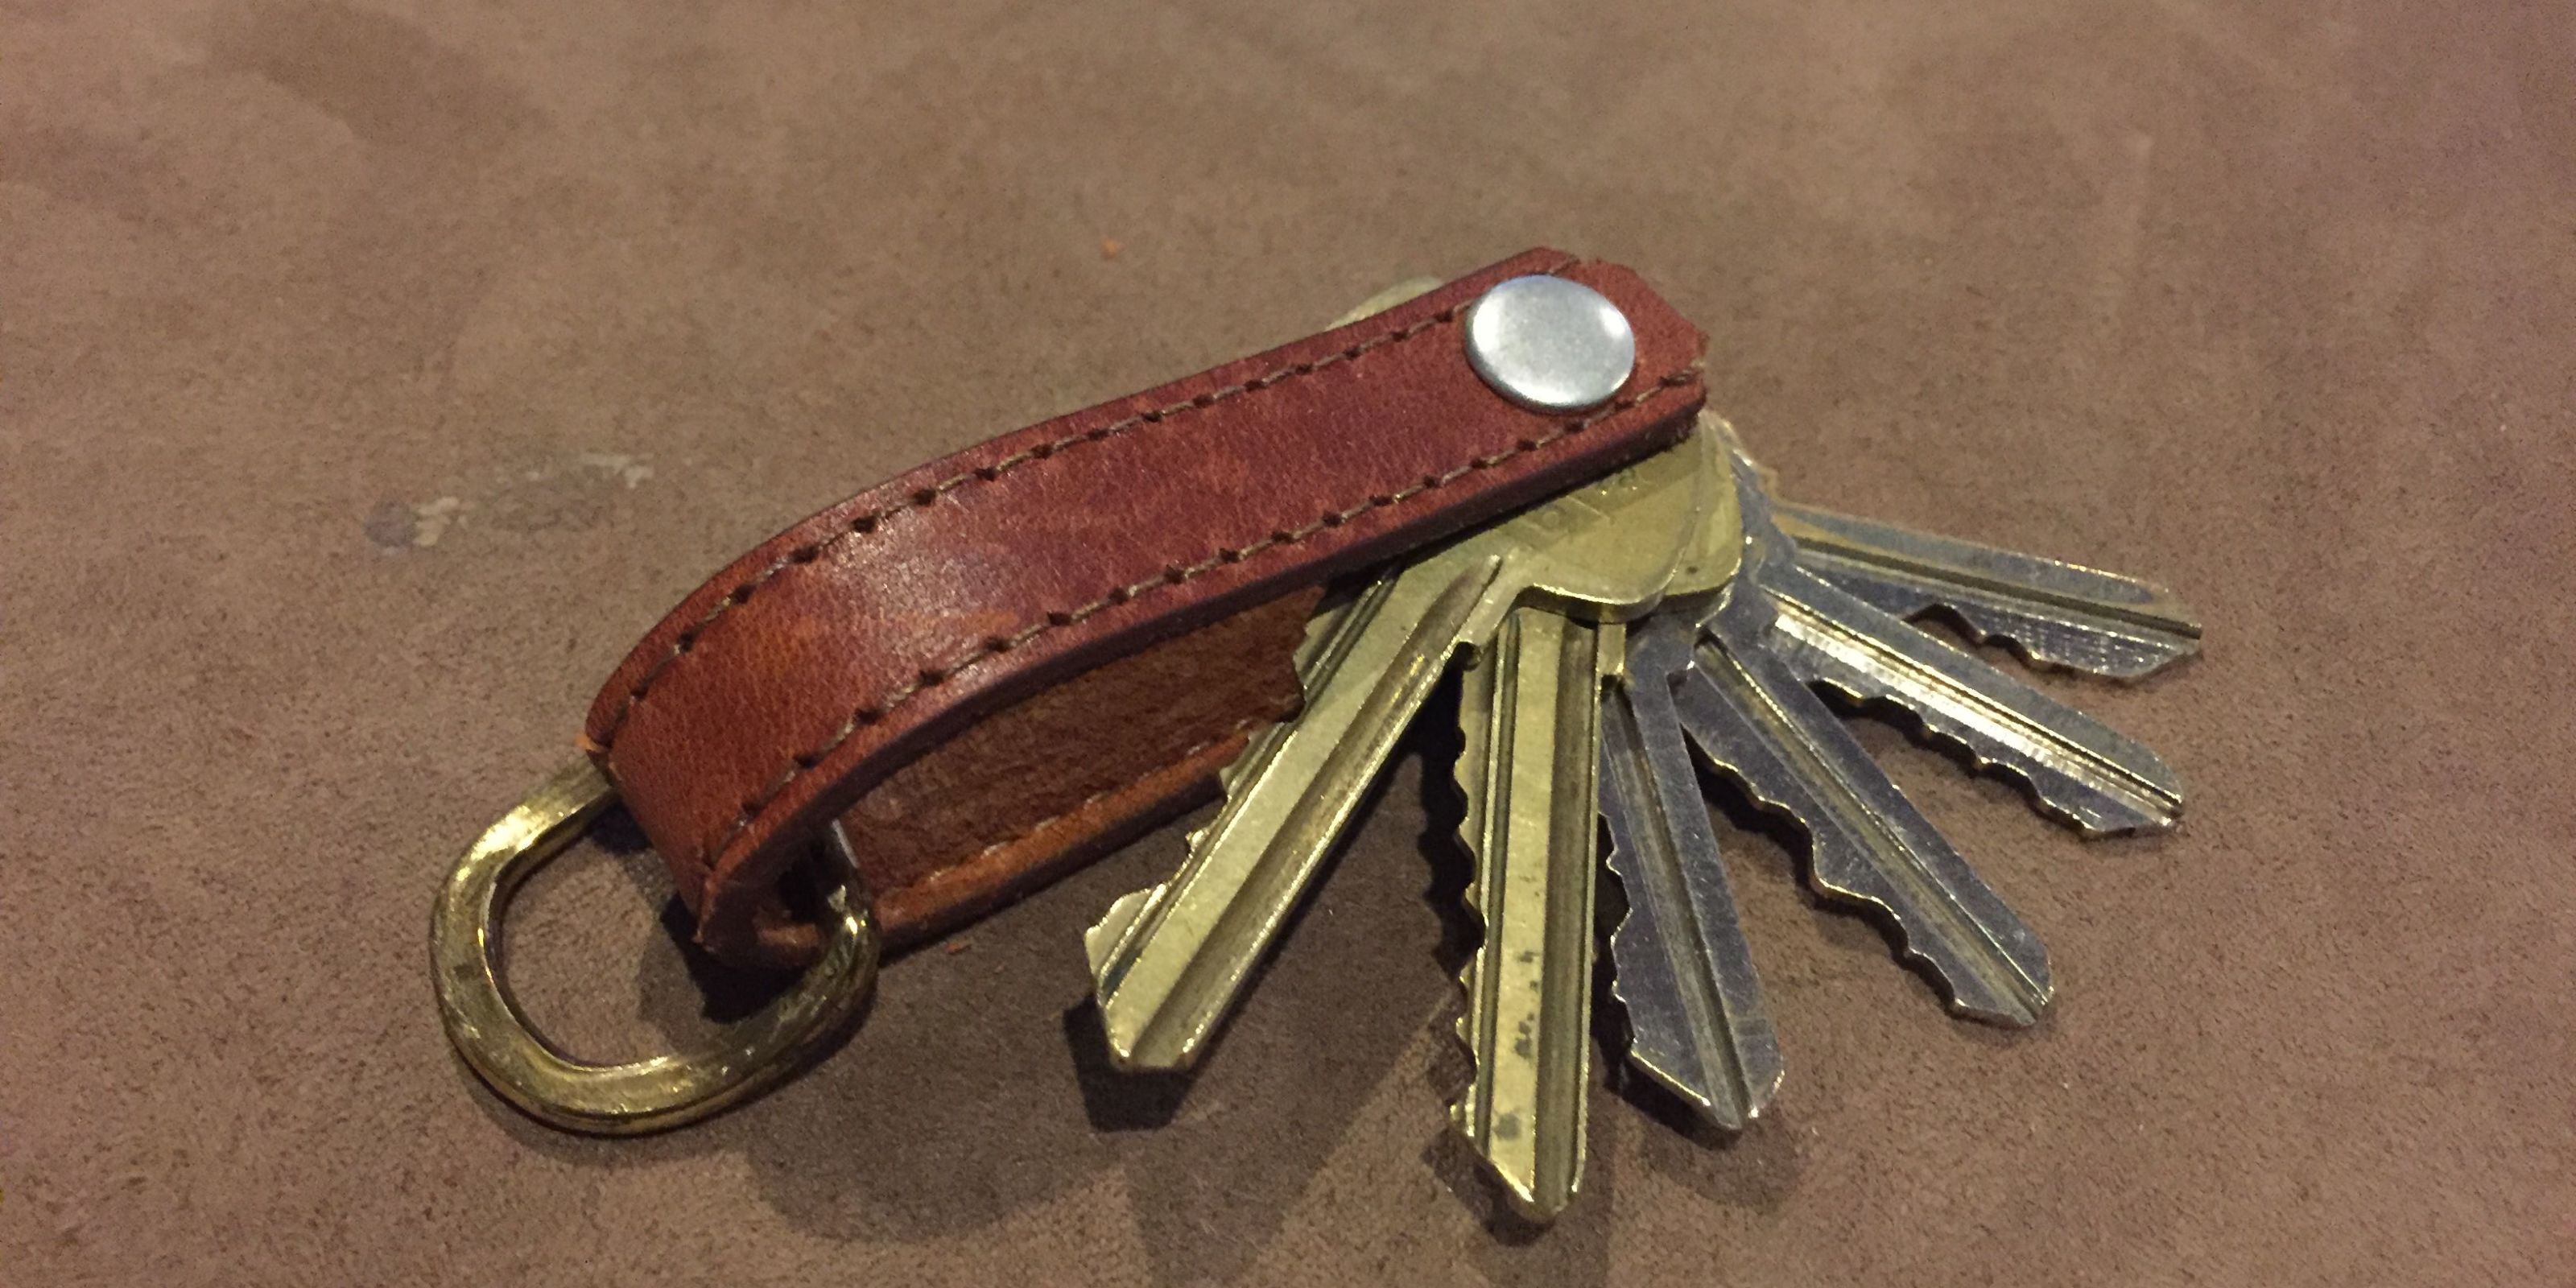 compact key holder review